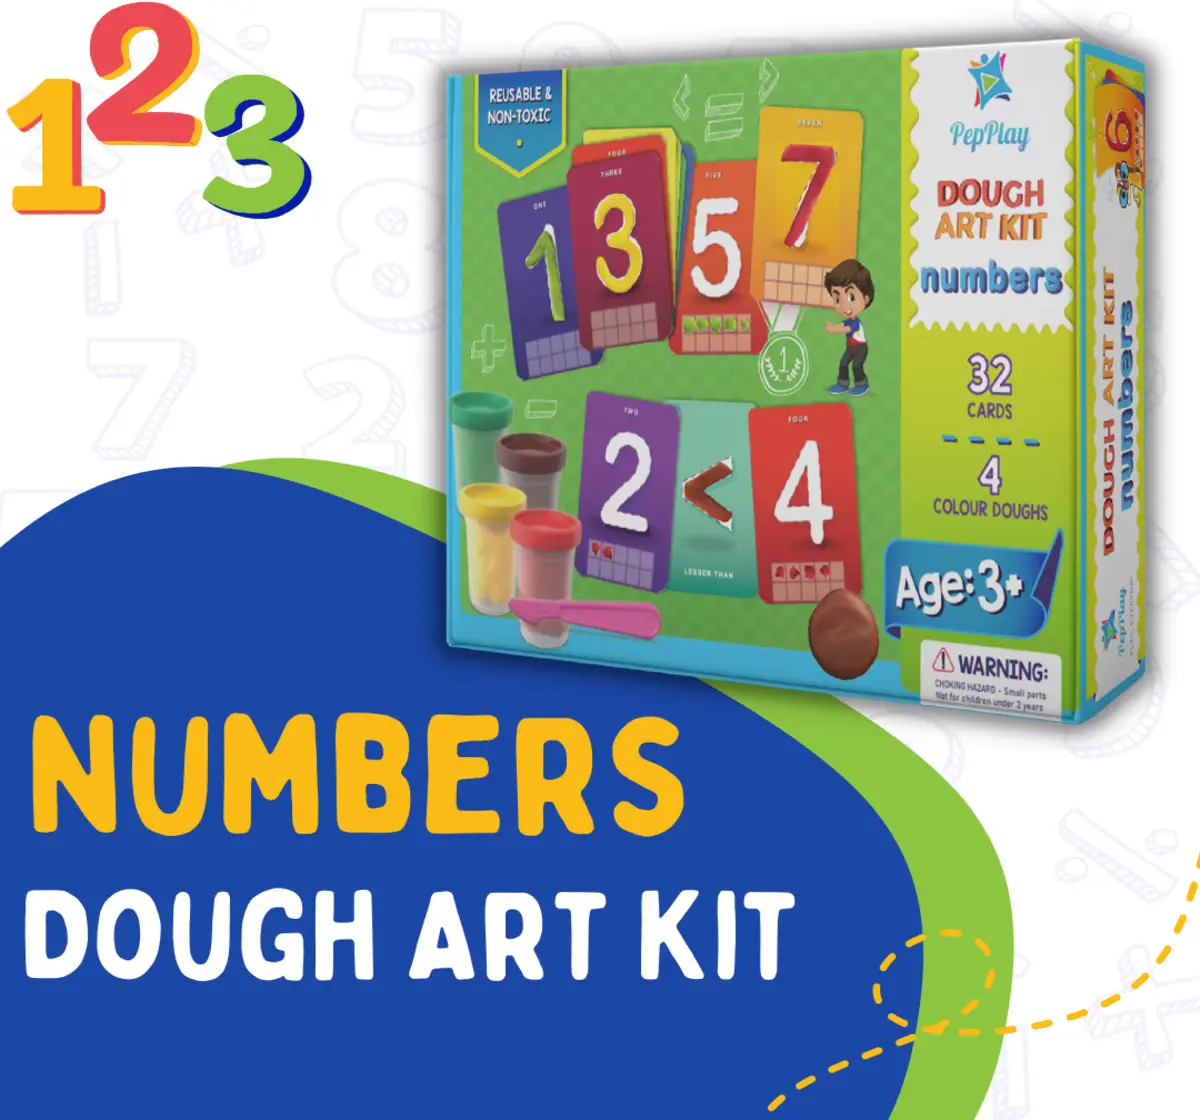 PepPlay Dough Art Kit Numbers For Kids of Age 3Y+, Multicolour